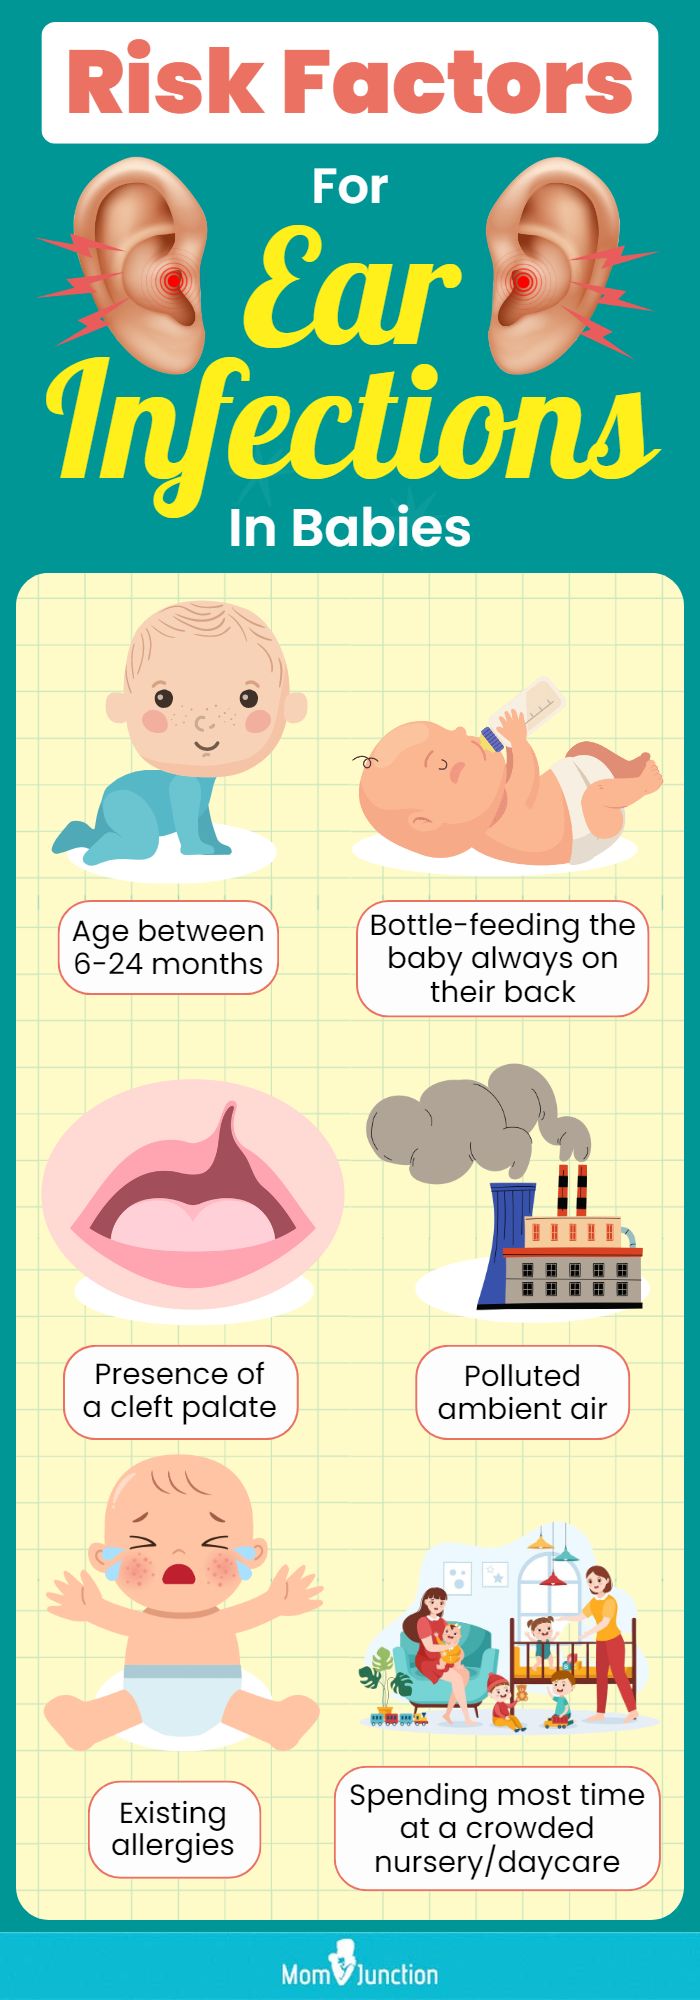 risk factors for ear infections in babies (infographic)